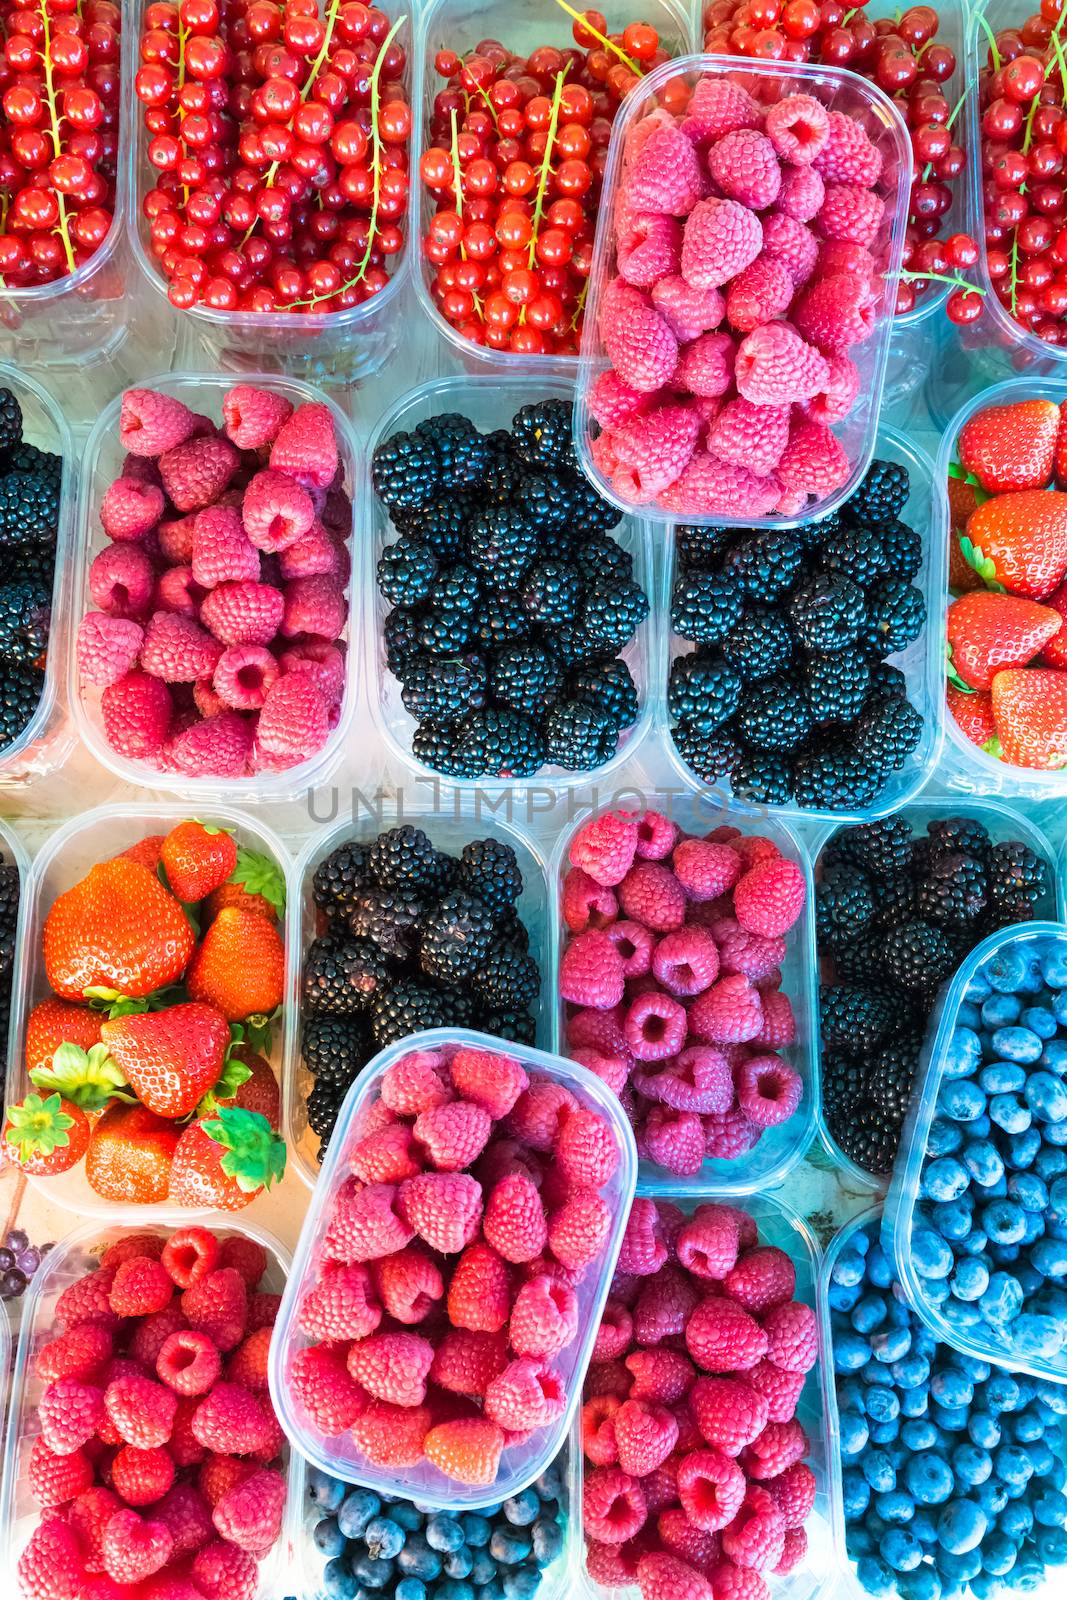 Blueberries, raspberries, strawberries, currants and blackberries in boxes formin colourful pattern.